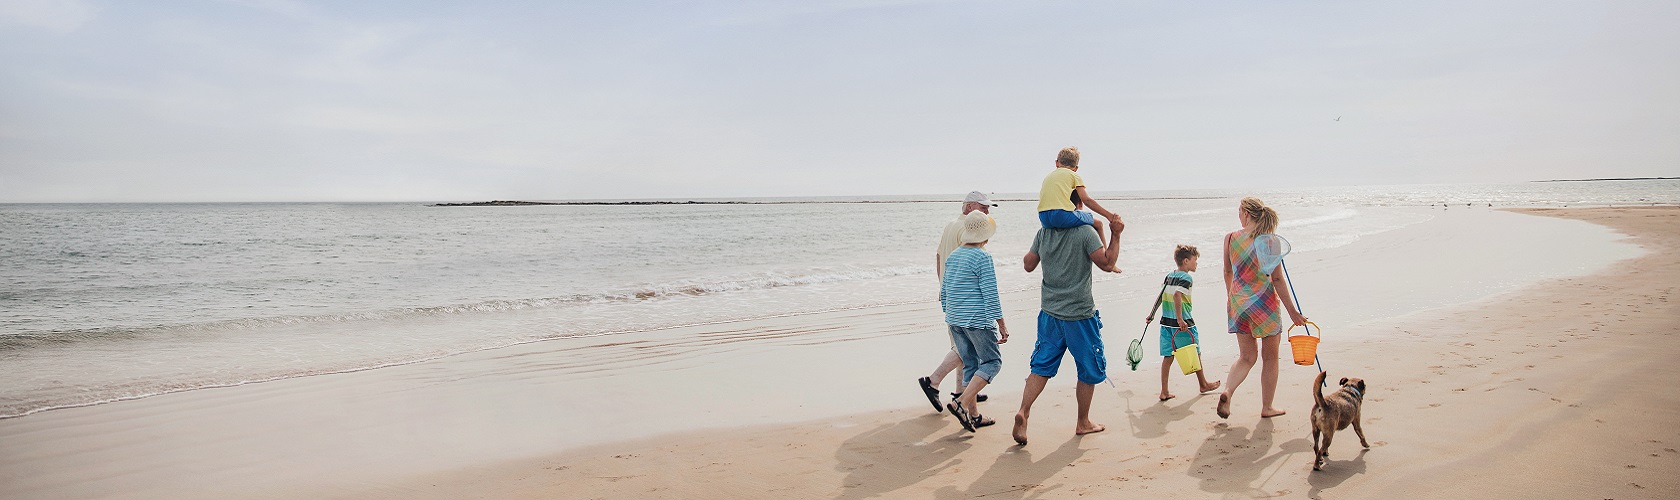 A family walking on a summer day on a beach